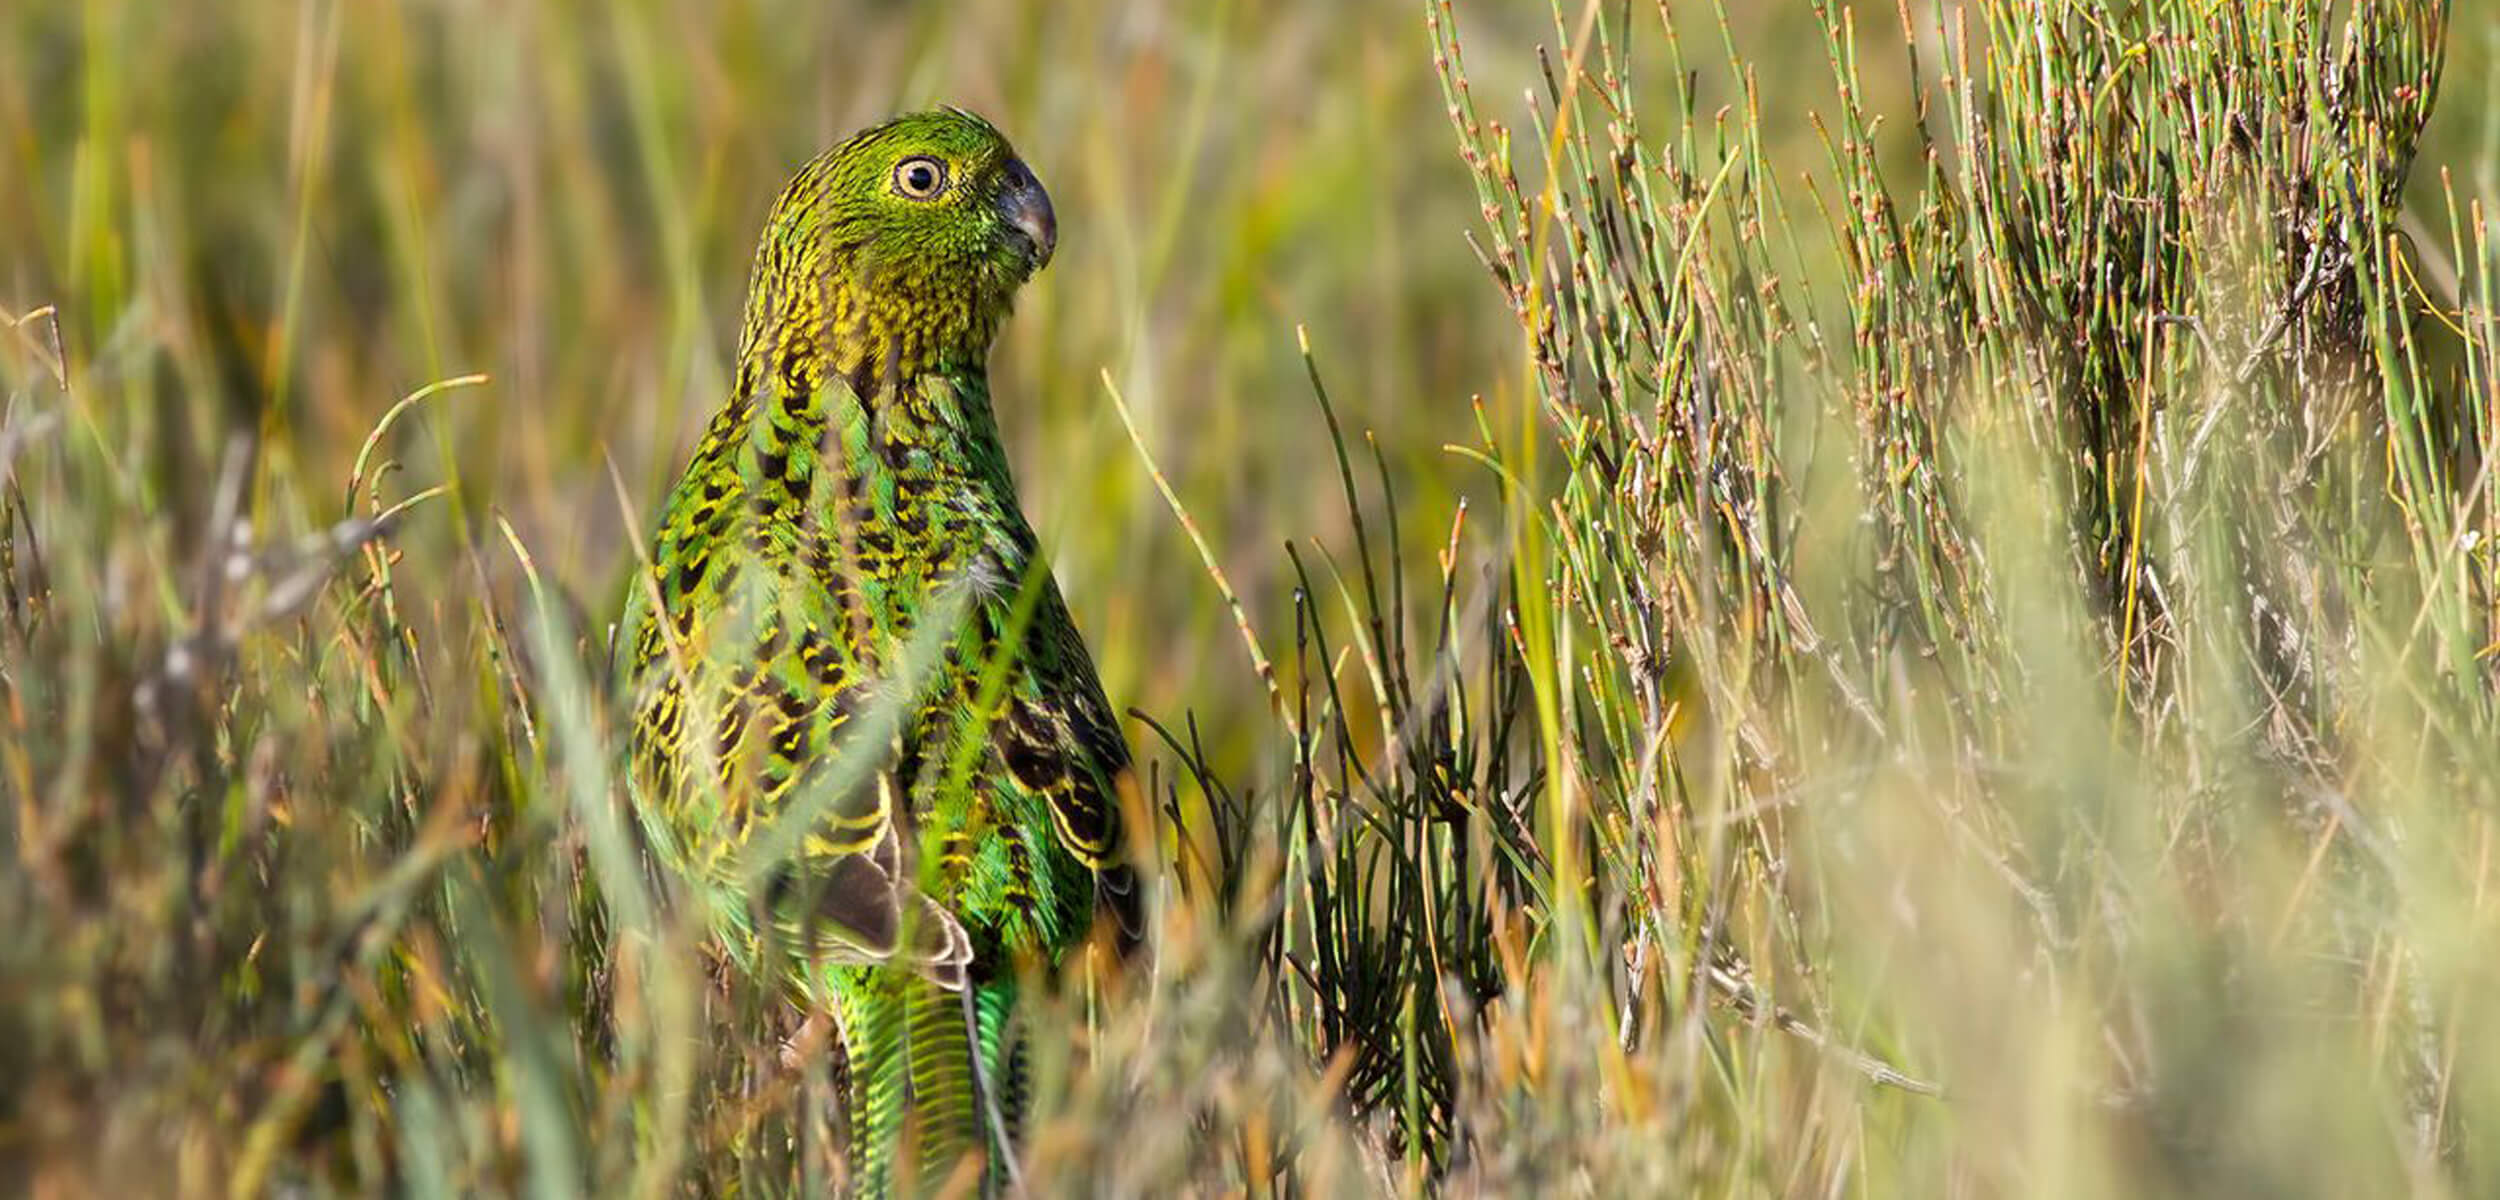 Ground Parrot in the Kiama Region, Photography by Lachlan Hall